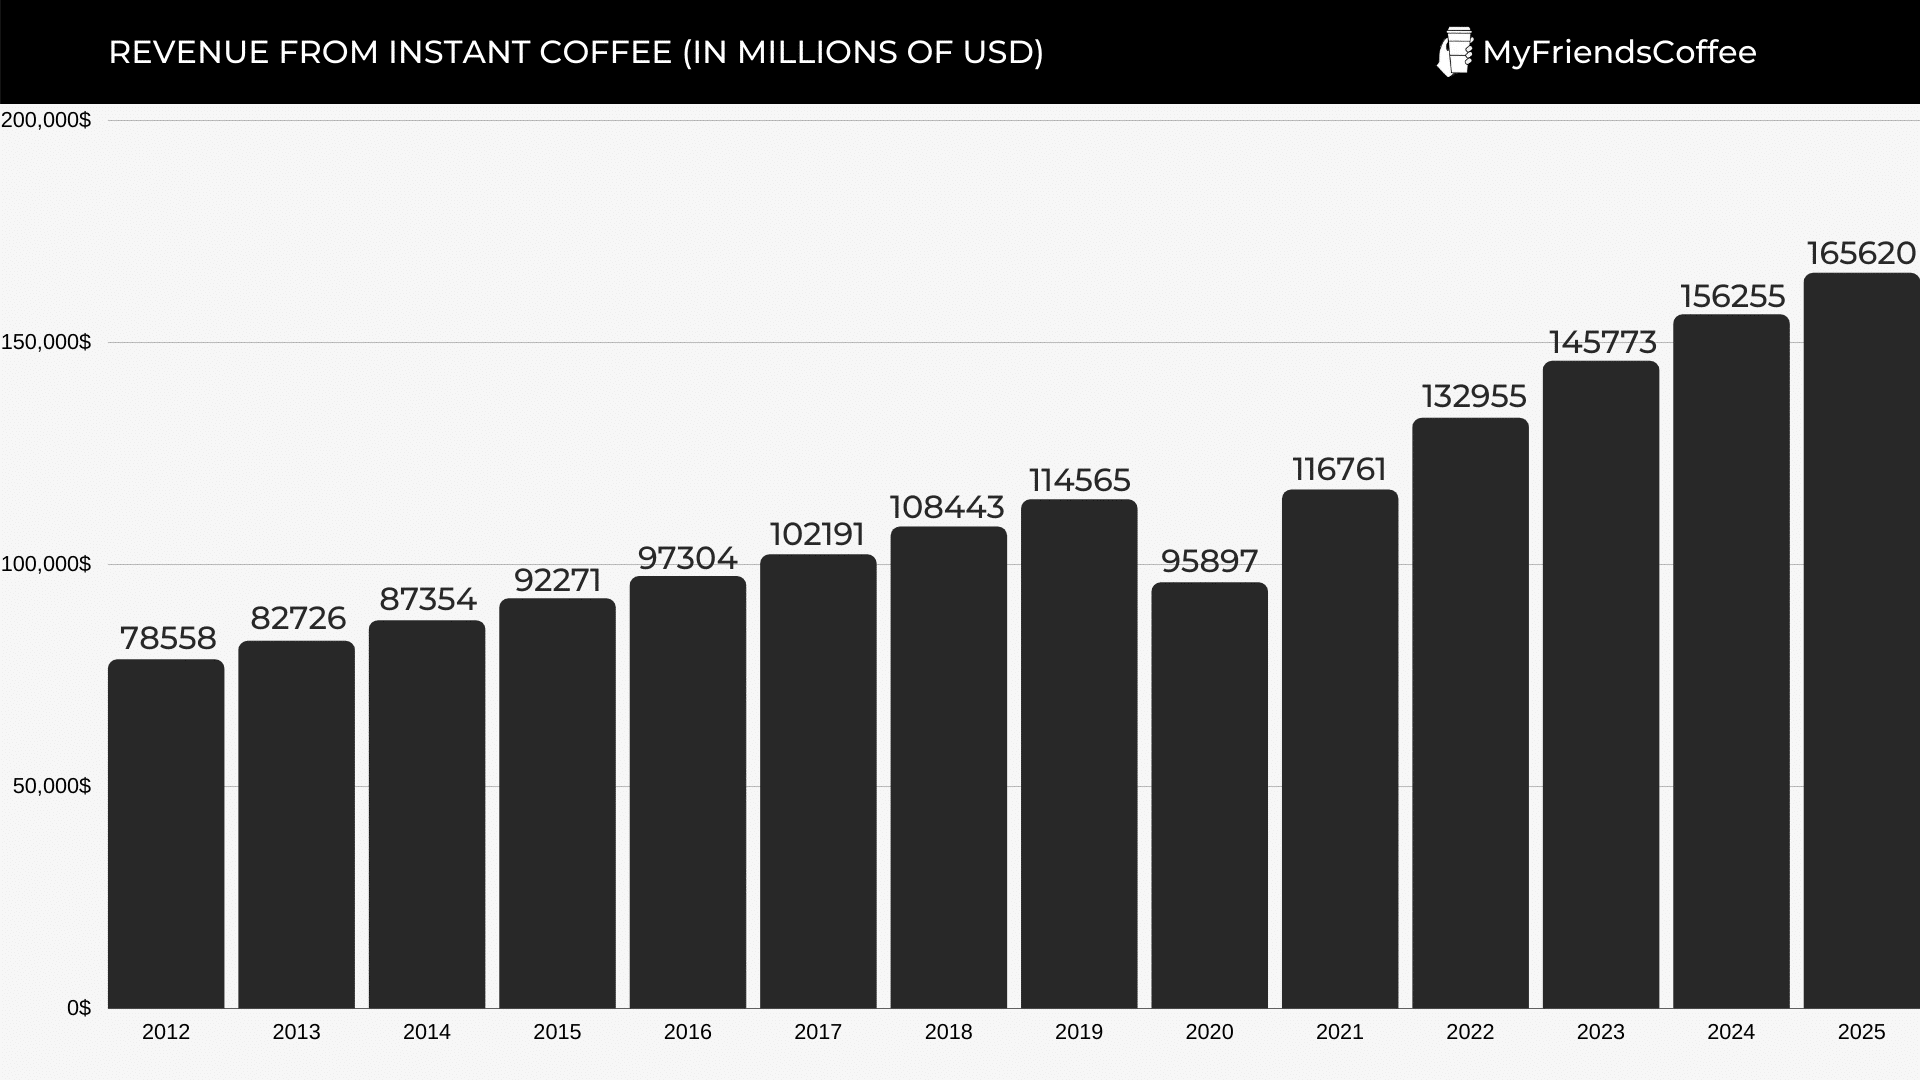 REVENUE FROM INSTANT COFFEE (IN MILLIONS OF USD)